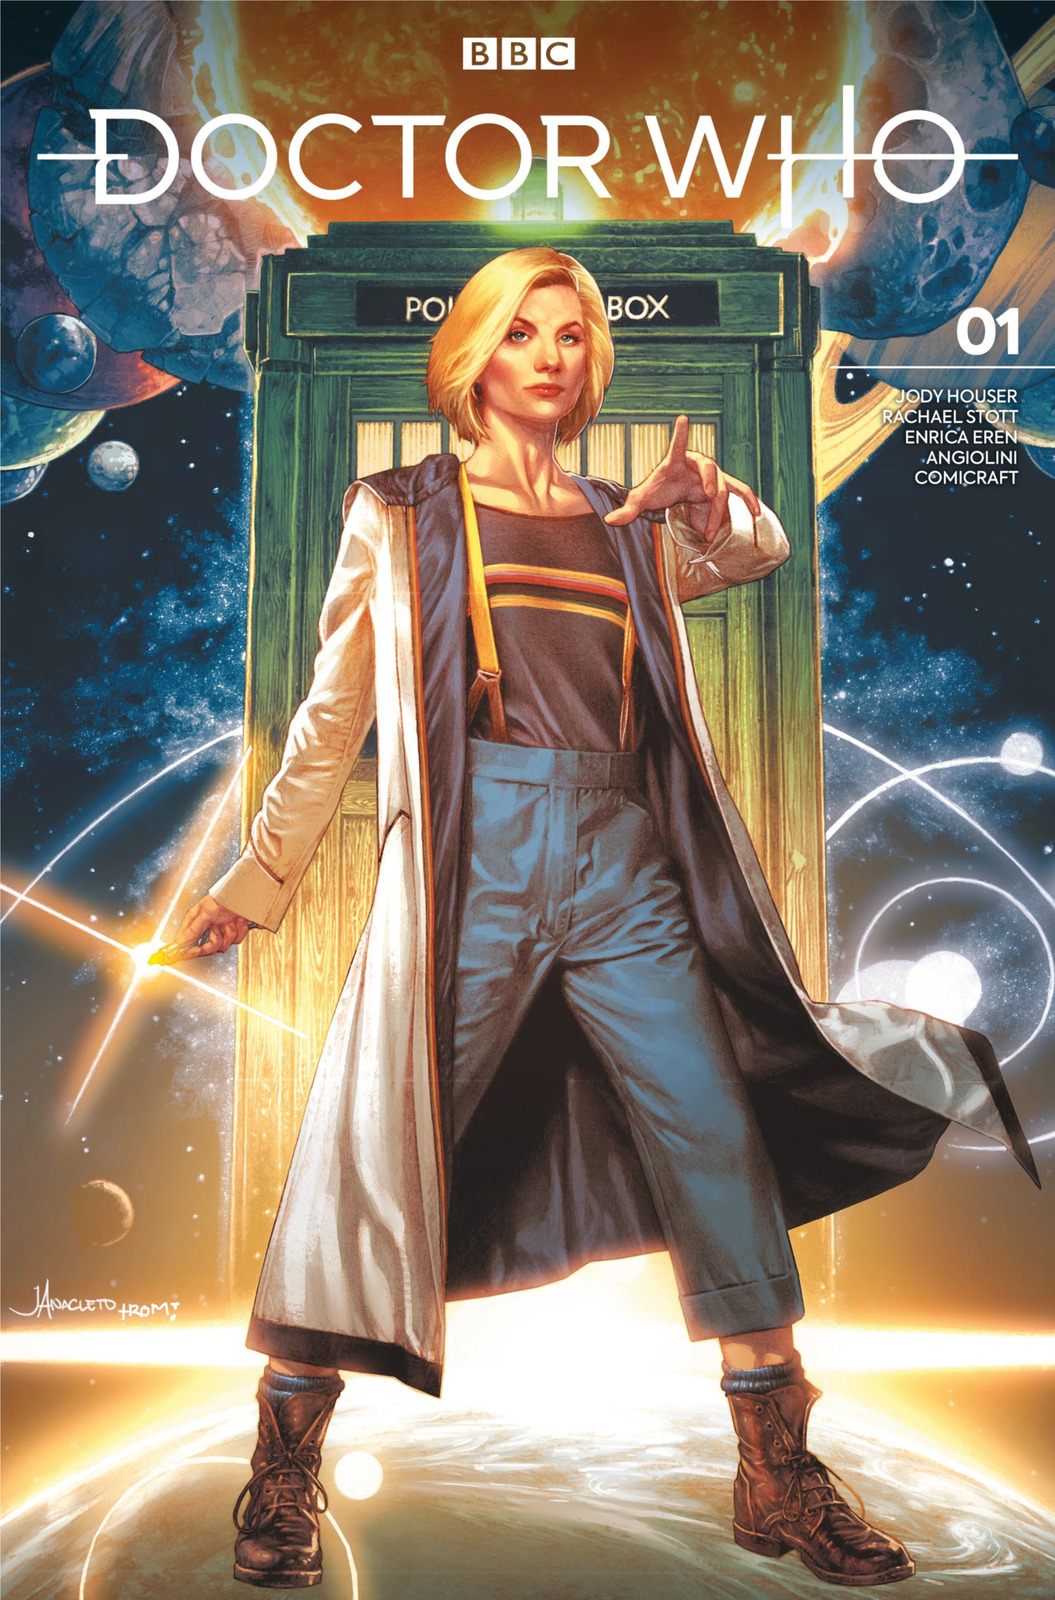 DOCTOR WHO 13TH #1 UNKNOWN COMIC BOOKS ANACLETO EXCLUSIVE VAR 11/7/2018